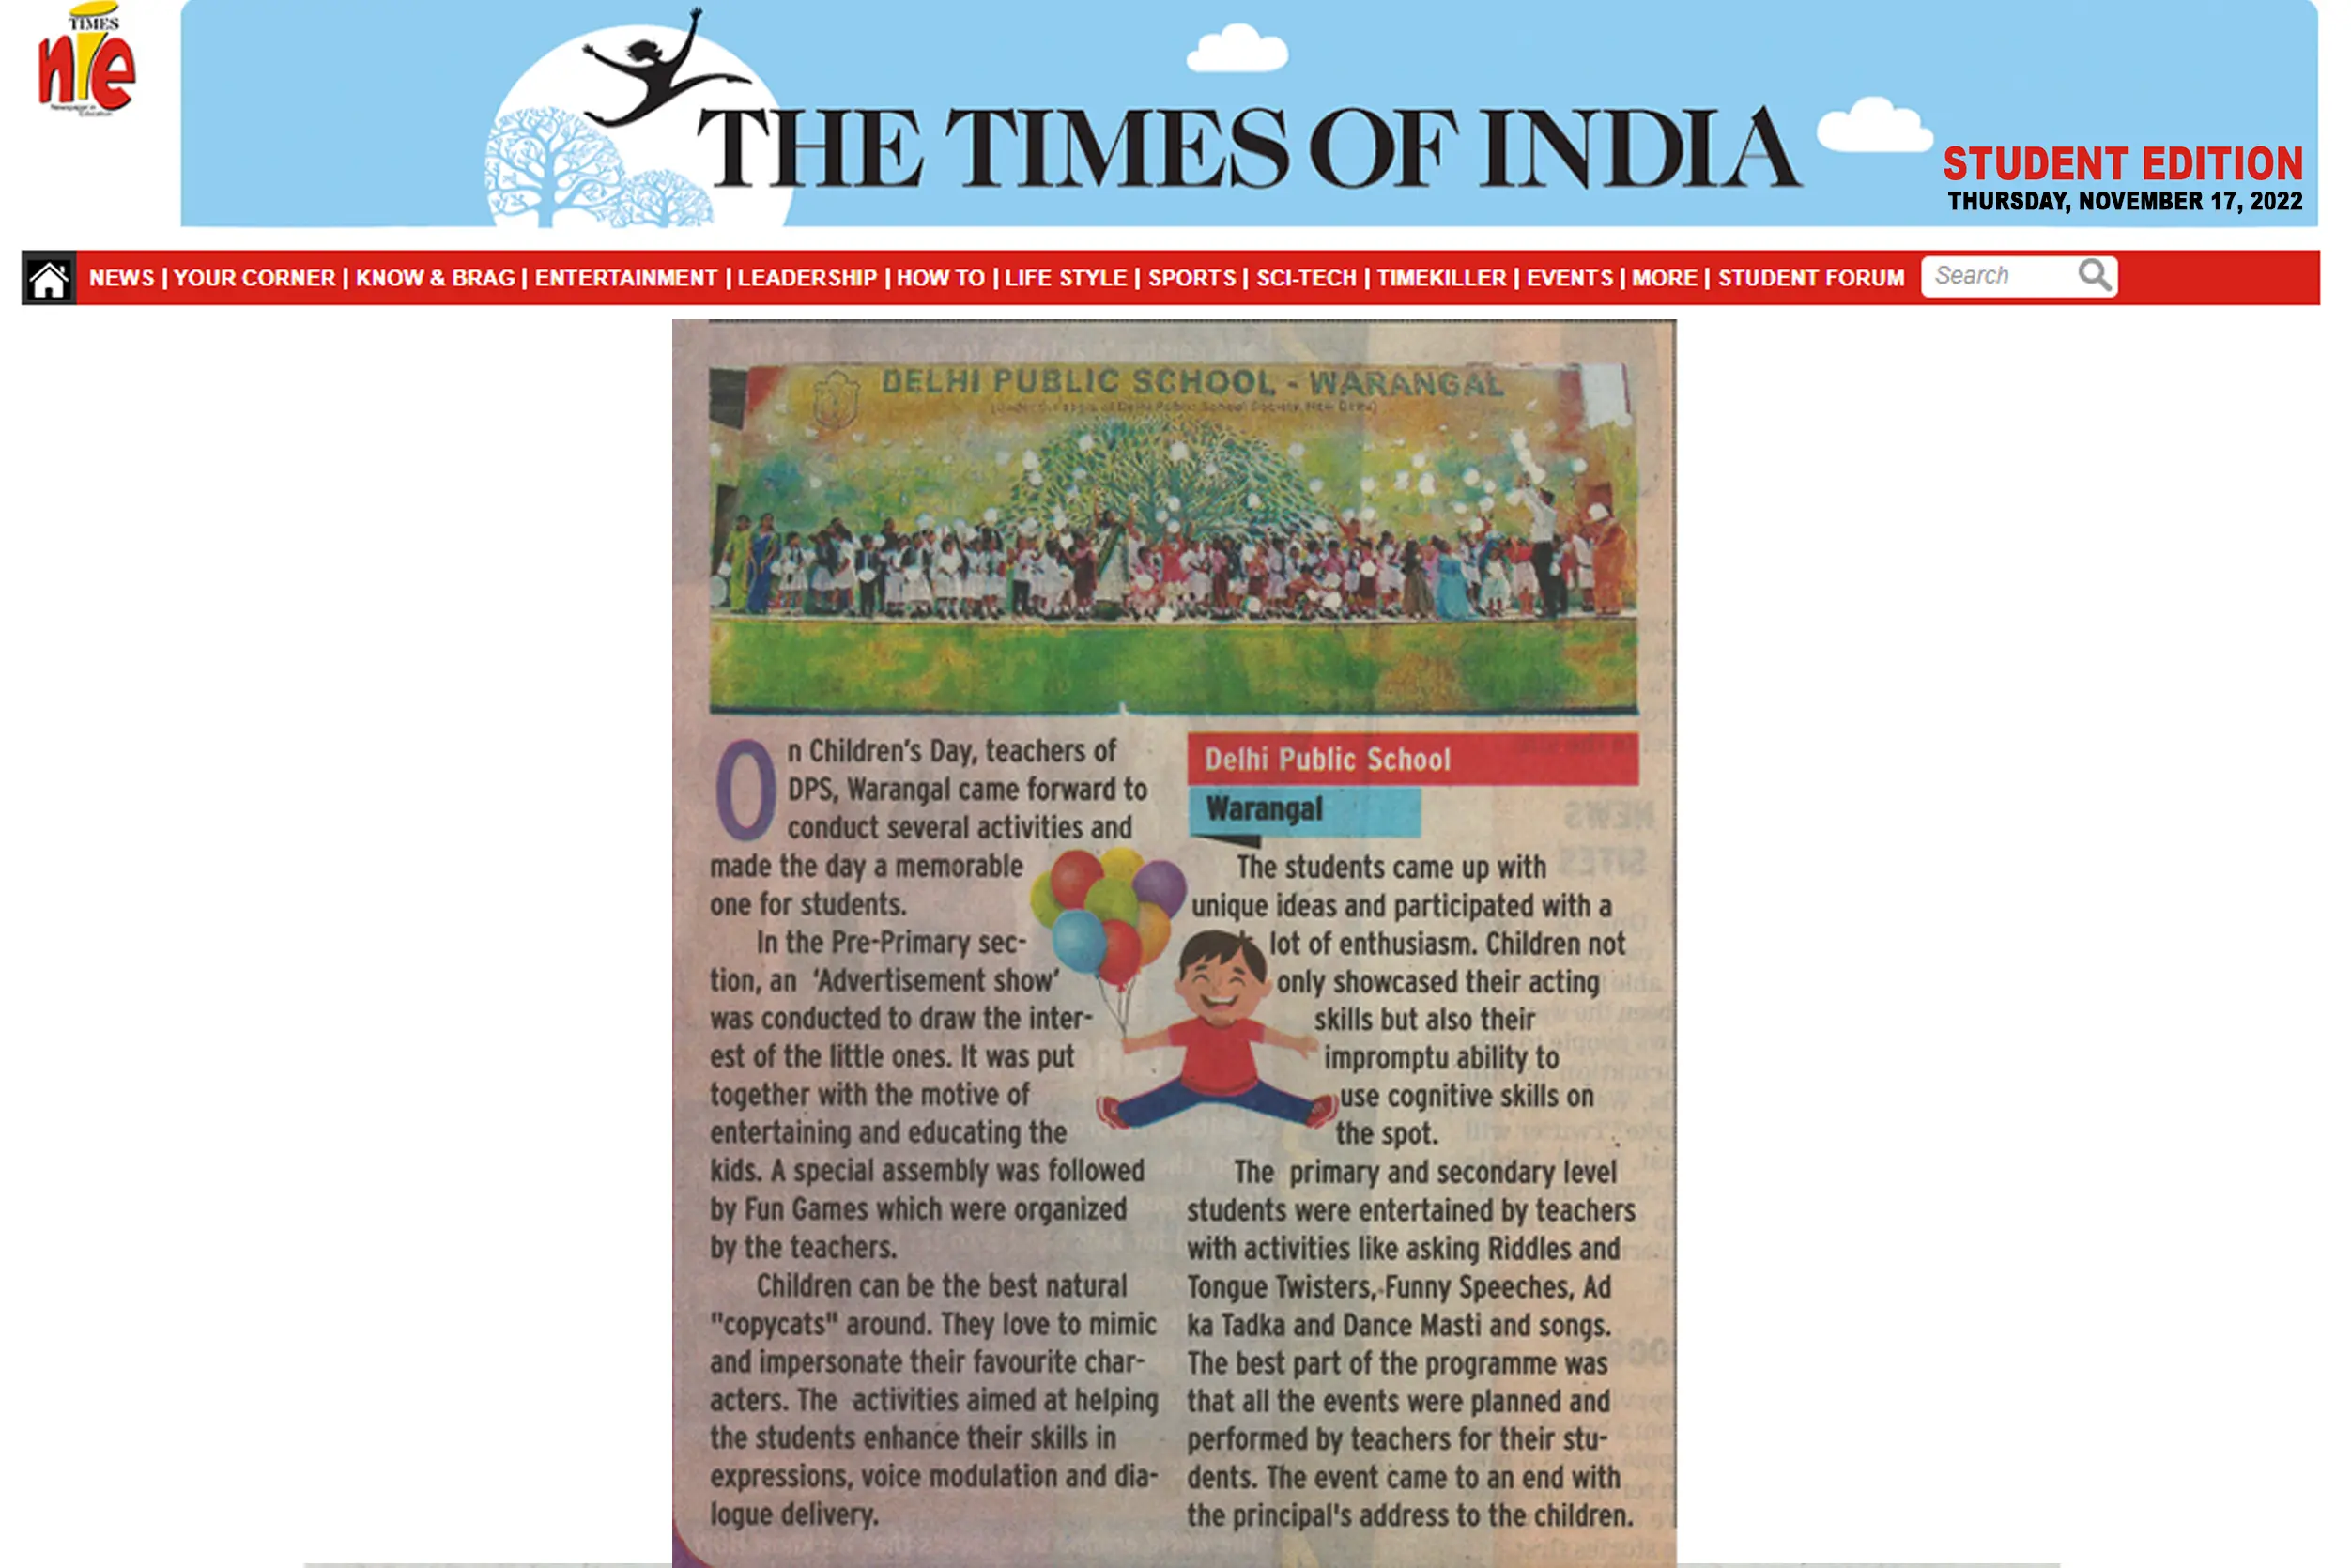 An article describing about the enthusiastic Children's day celebration at DPS Warangal got published in The Times Of India.